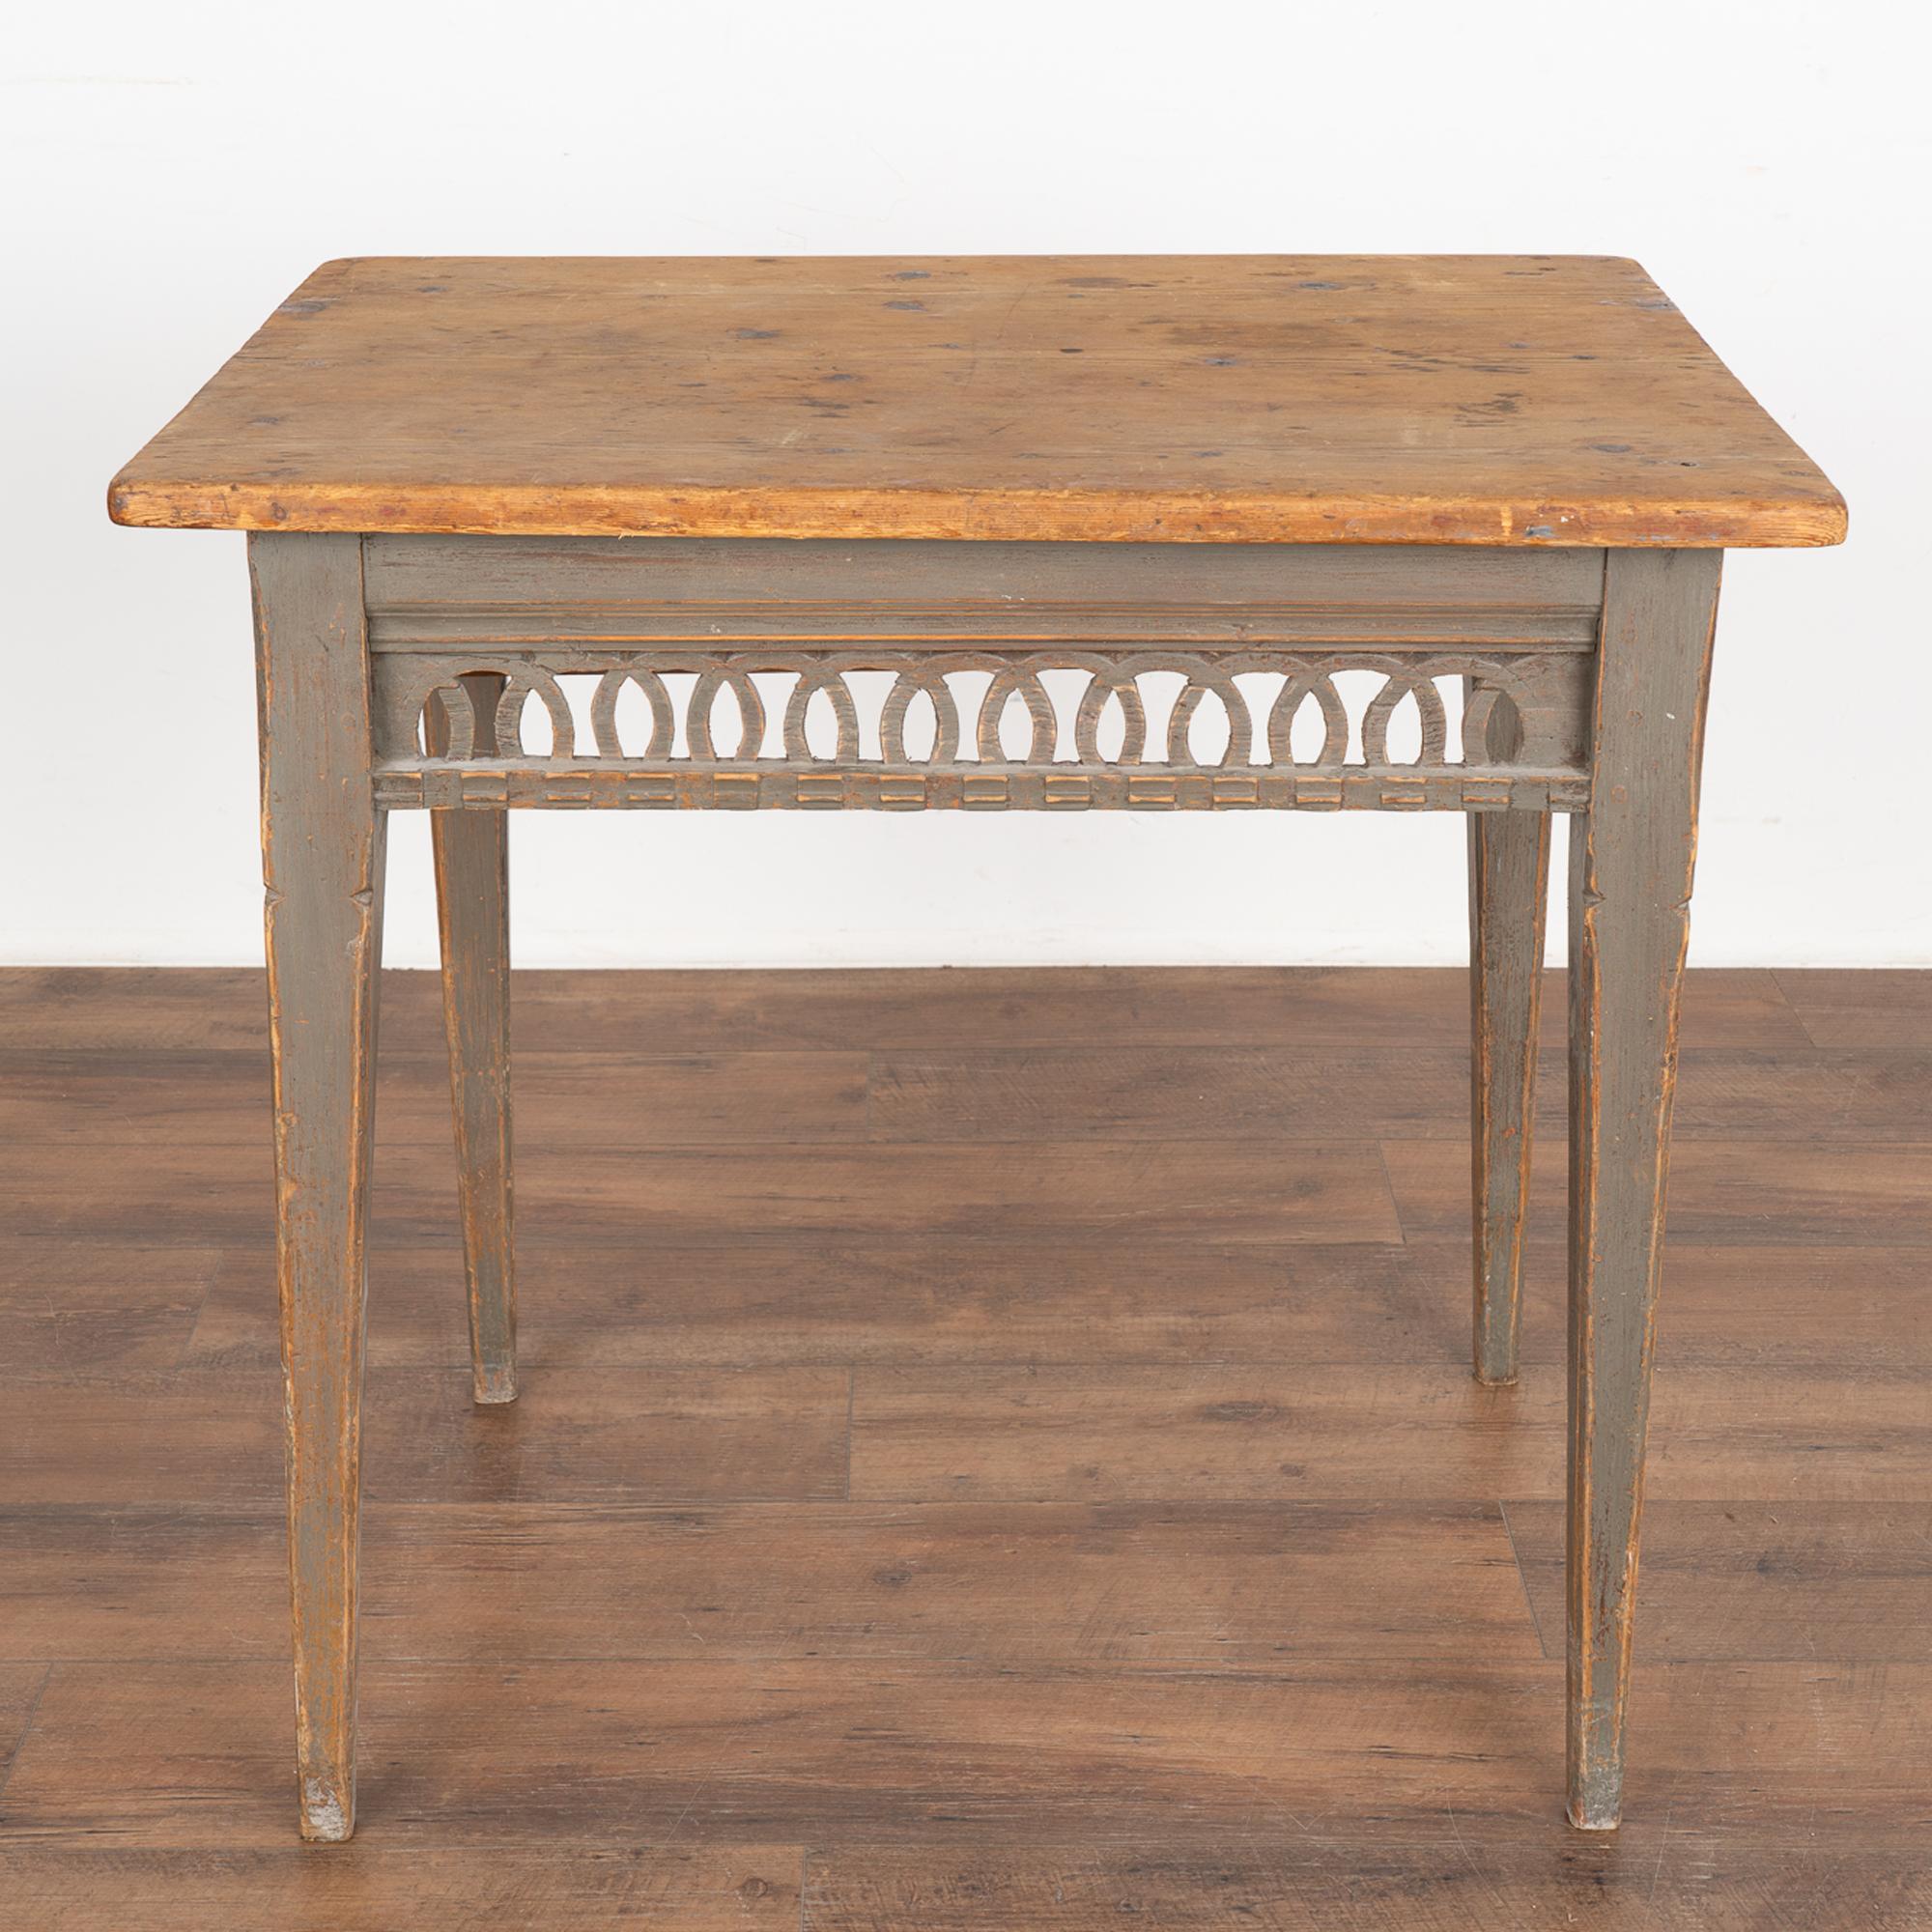 Swedish Gray Painted Side Table with Drawer, Sweden circa 1820-1840